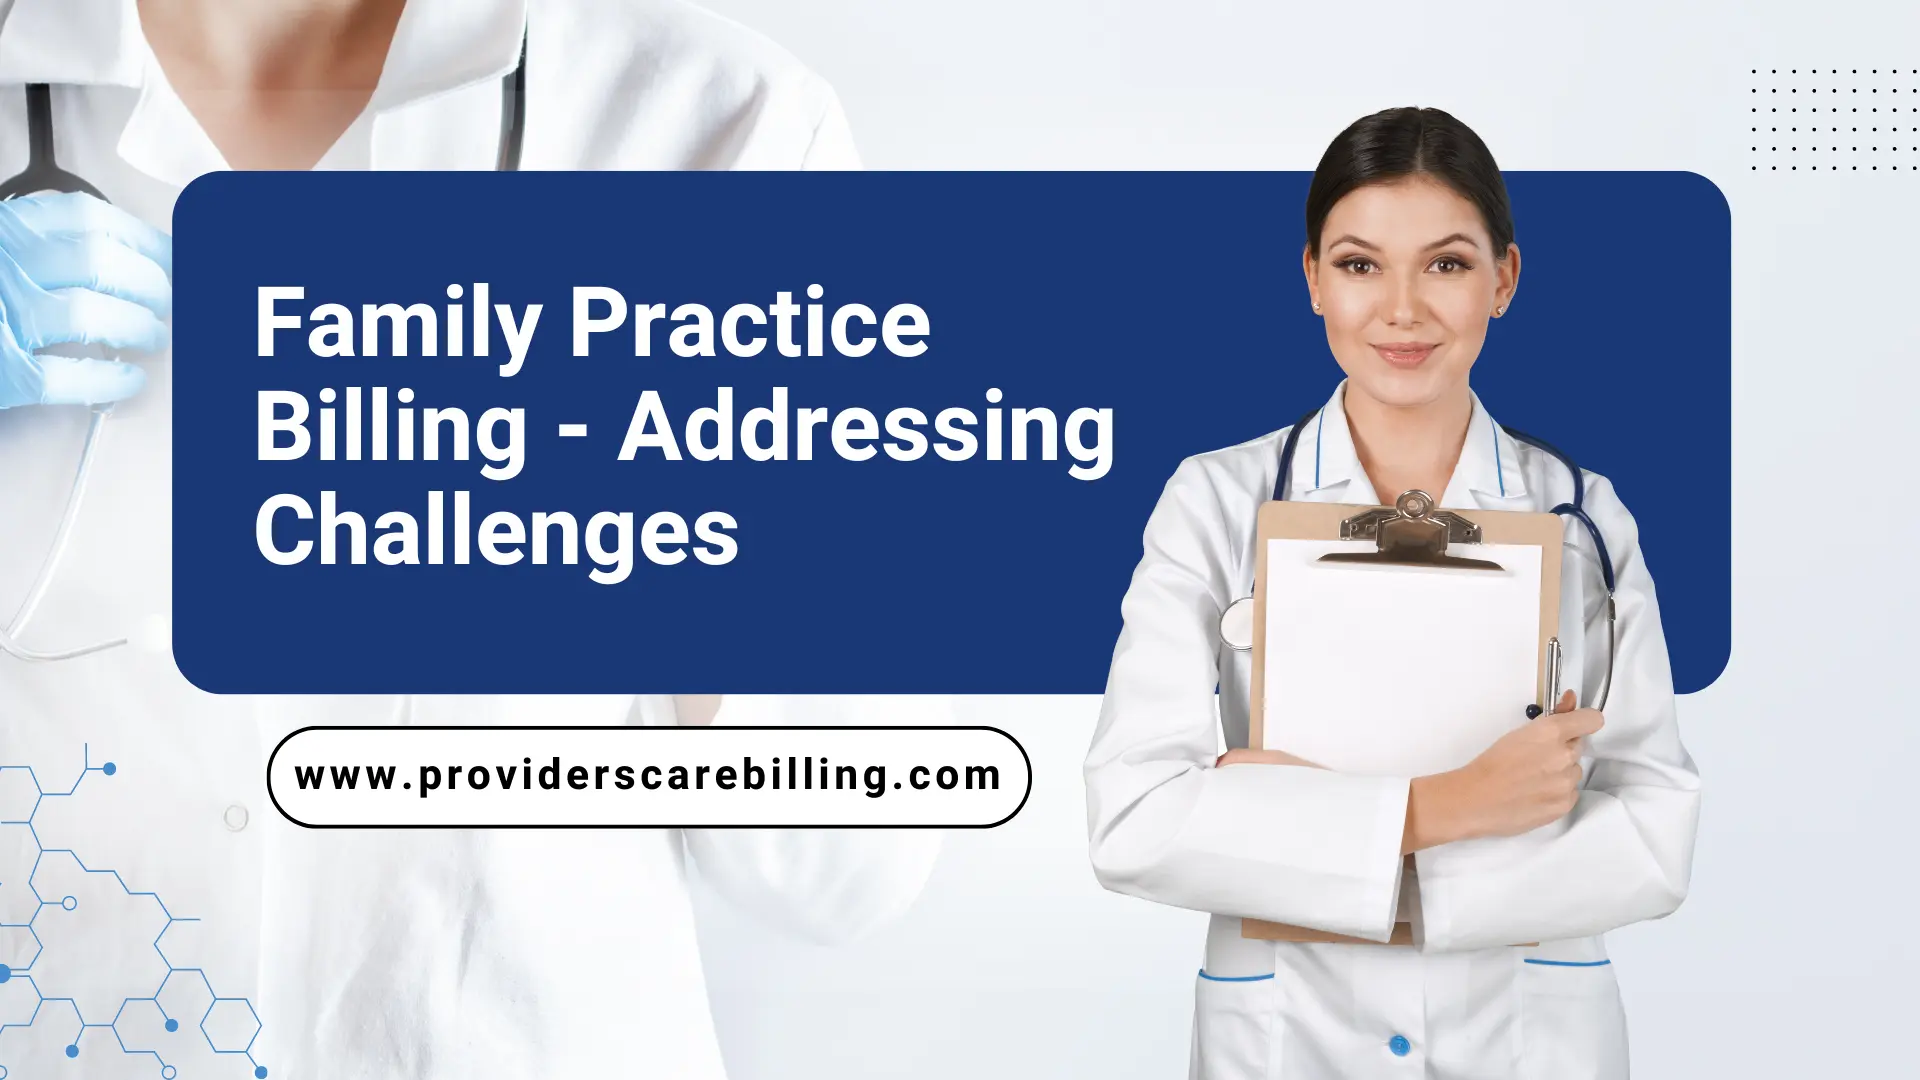 Family Practice Billing- Addressing Challenges